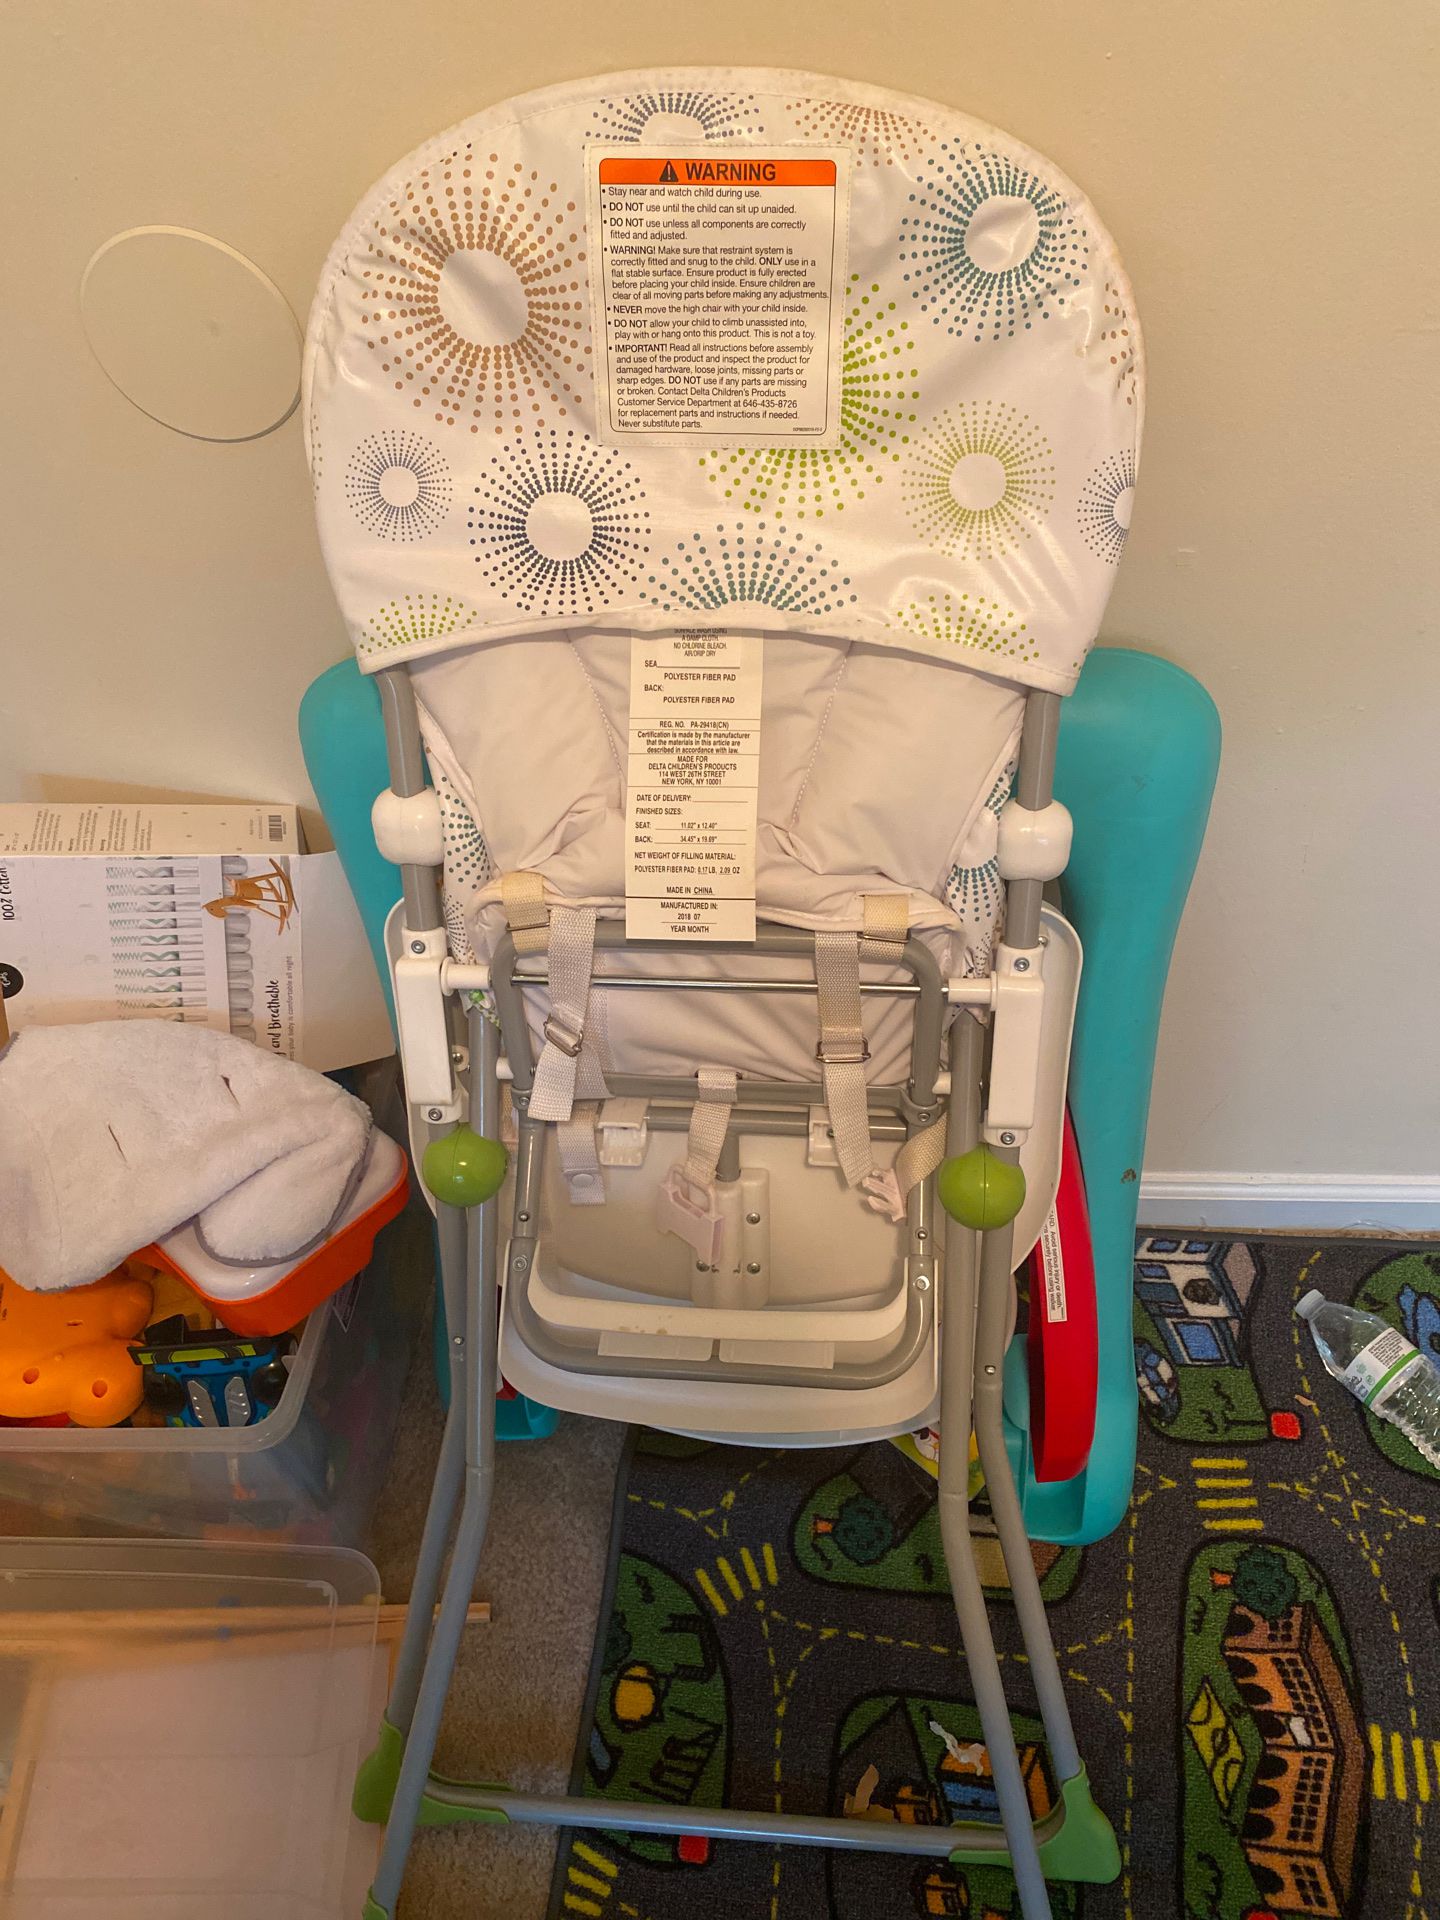 Eating high chair for babies and toddlers with foot rest.